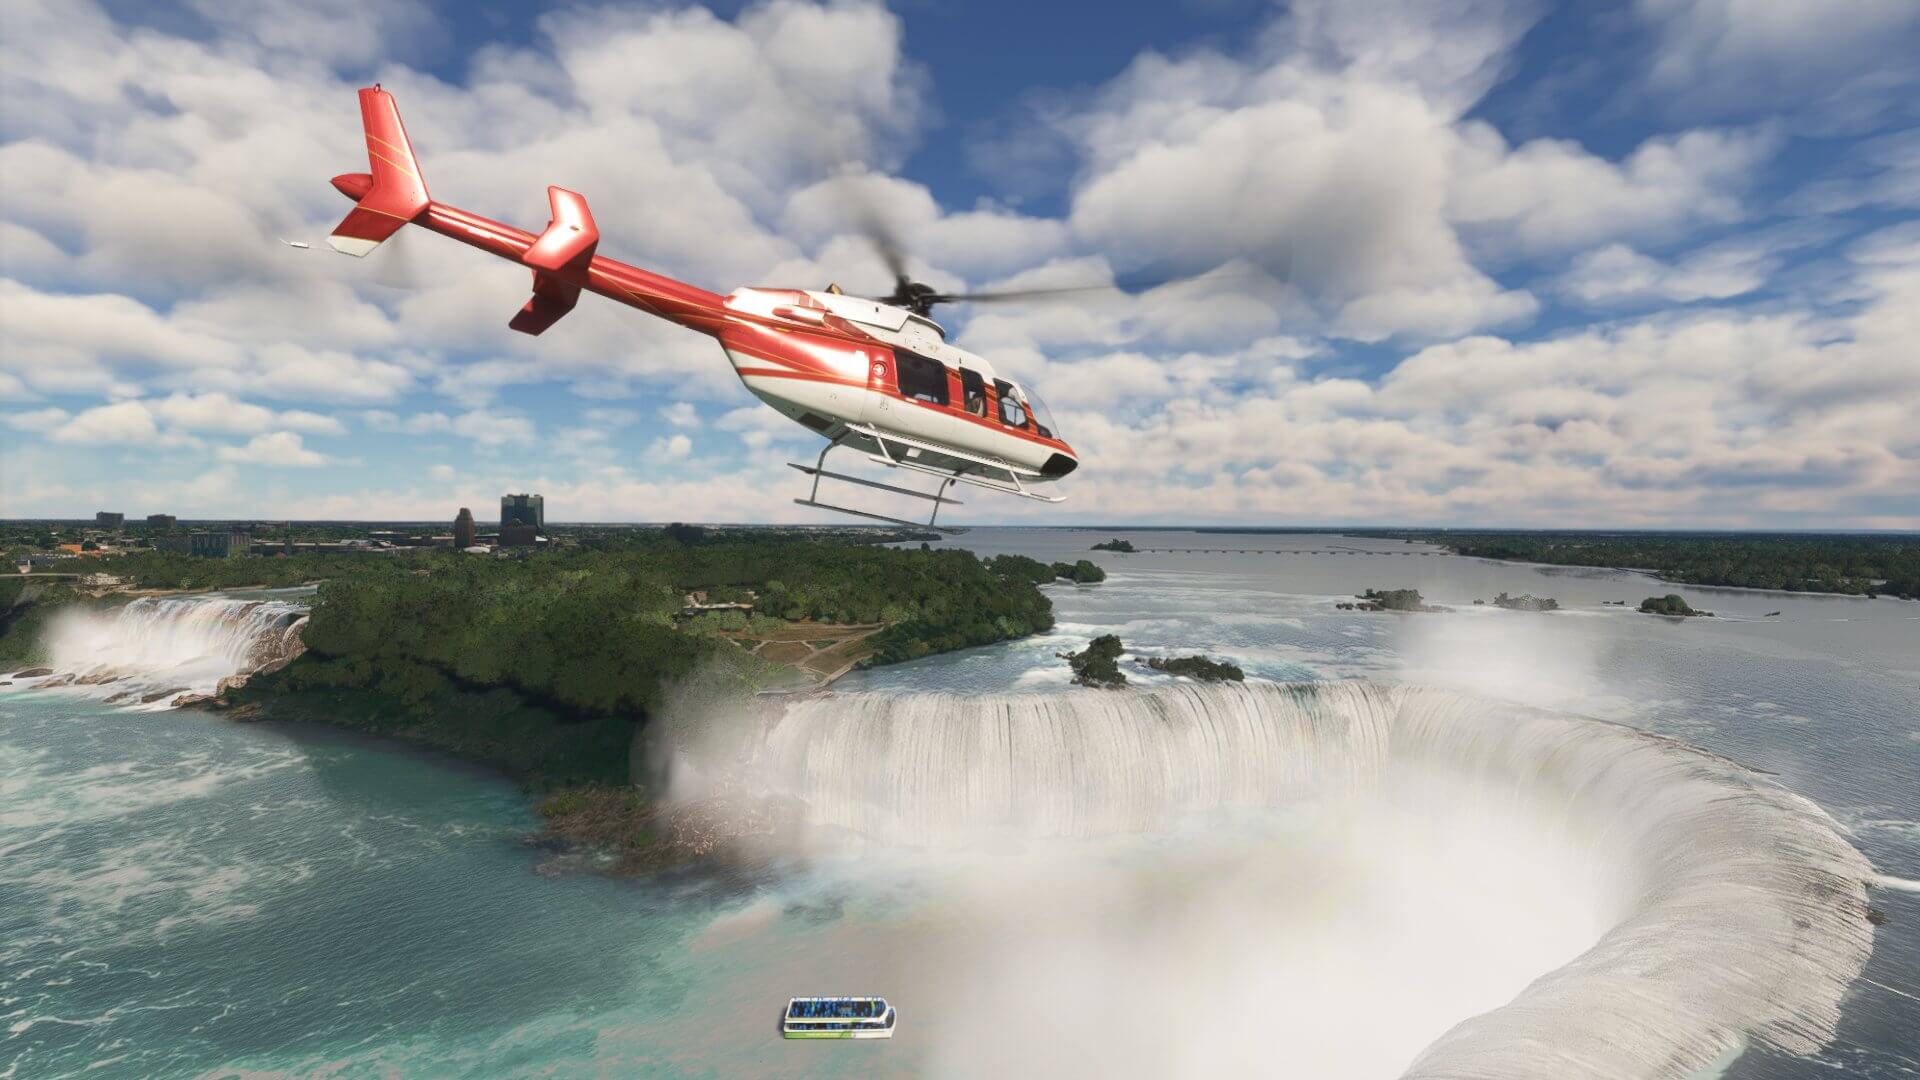 A Bell 407 in red and white livery flies close to Niagara Falls